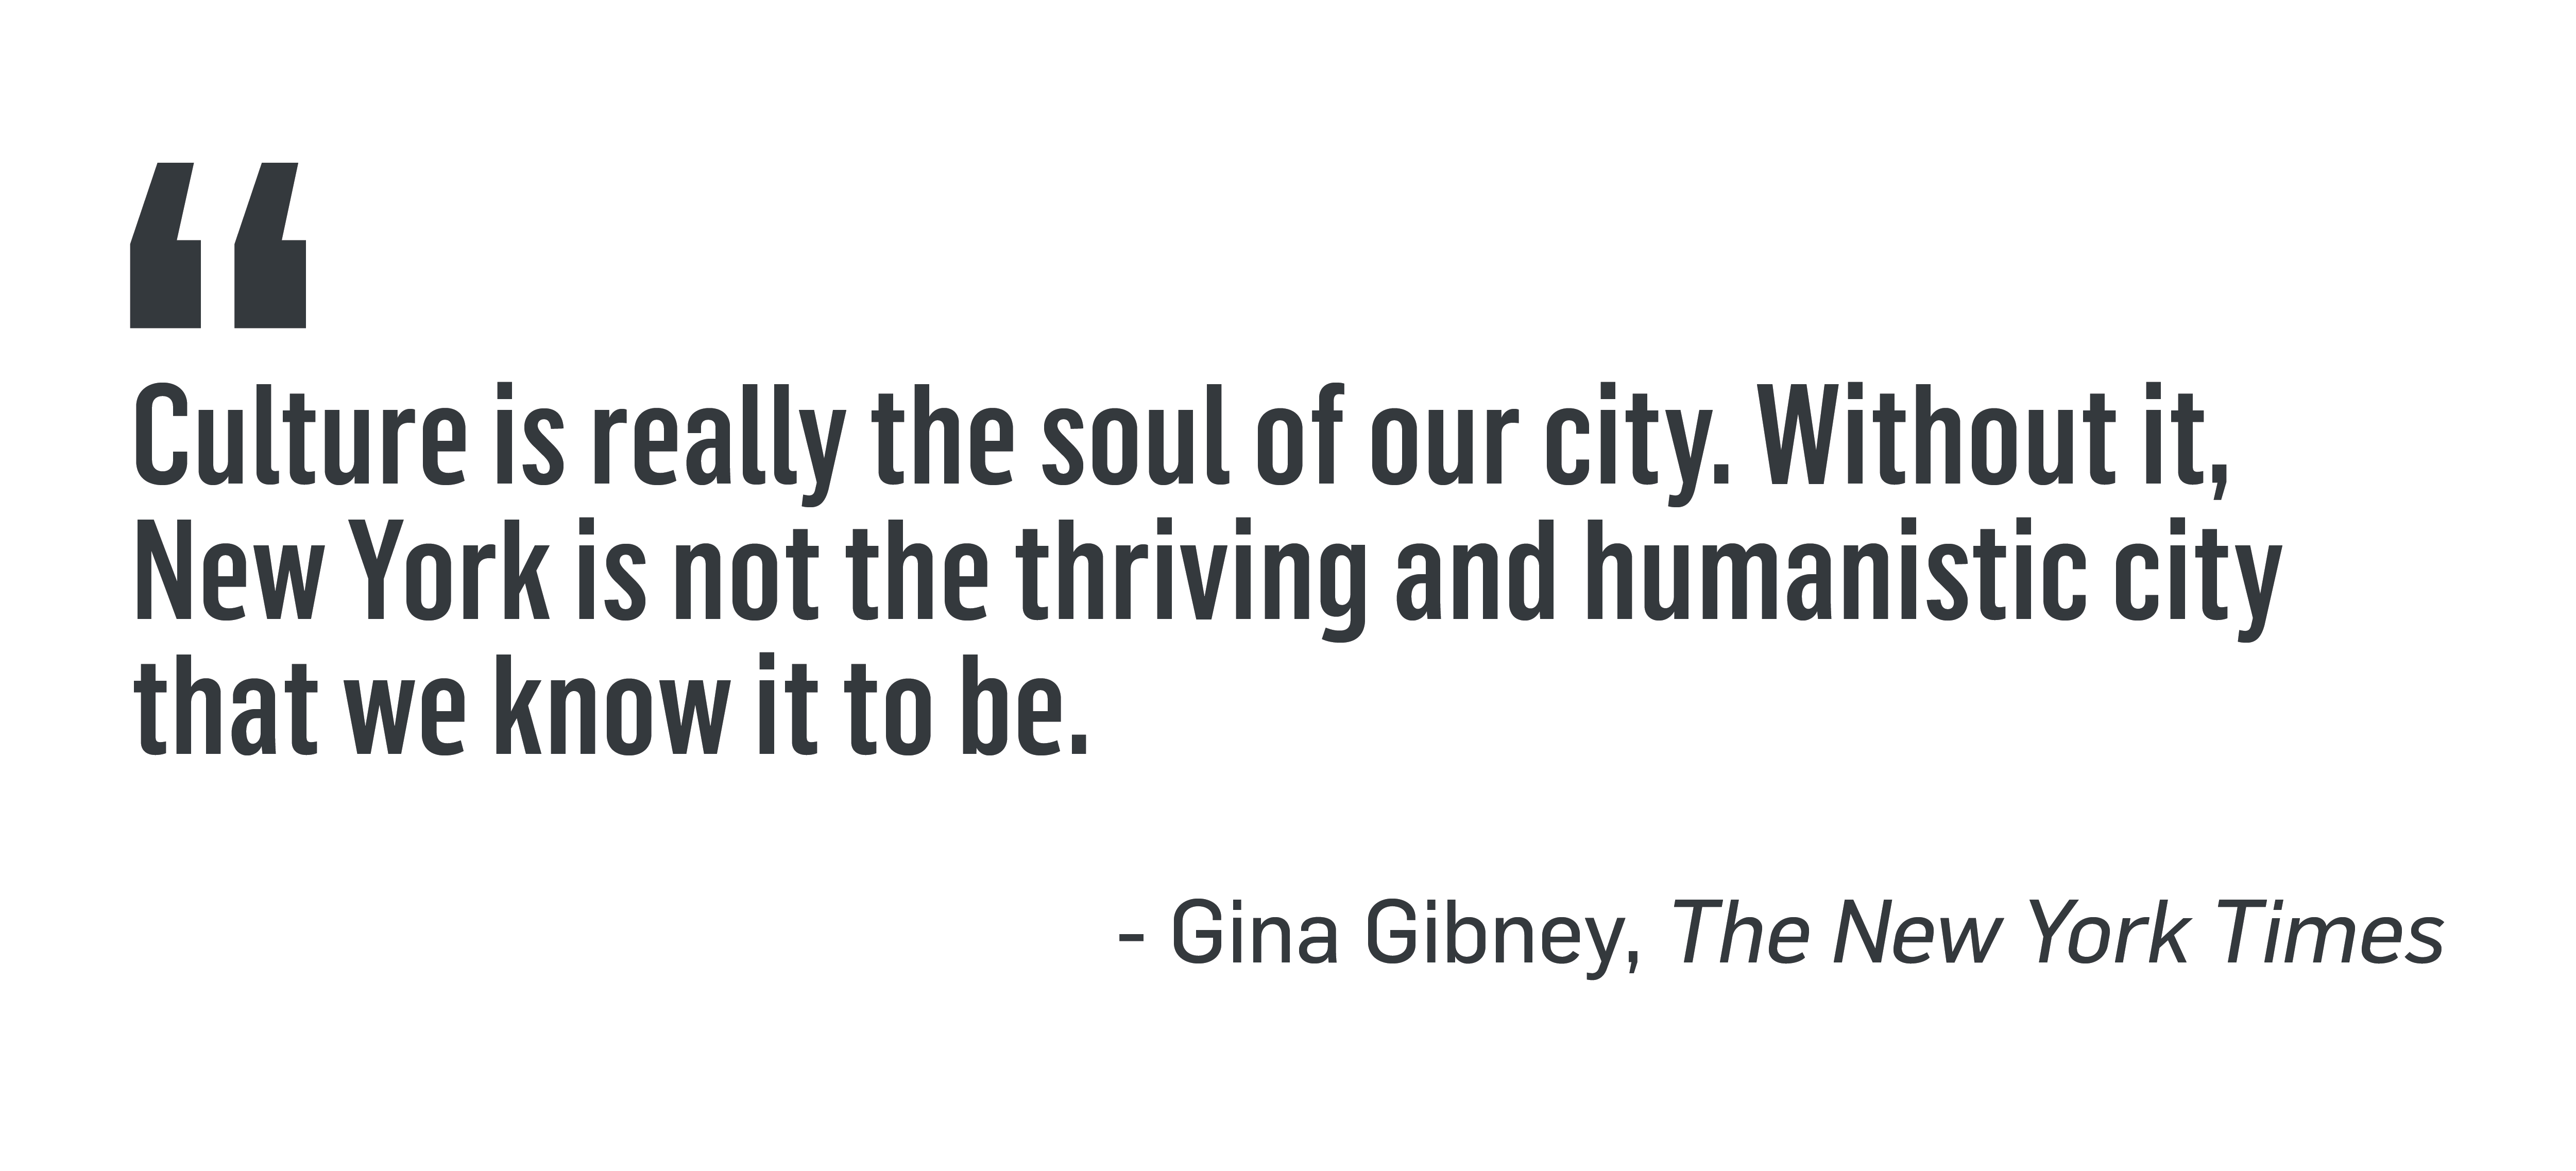 “Culture is really the soul of our city. Without it, New York is not the thriving and humanistic city that we know it to be.” - Gina Gibney, The New York Times